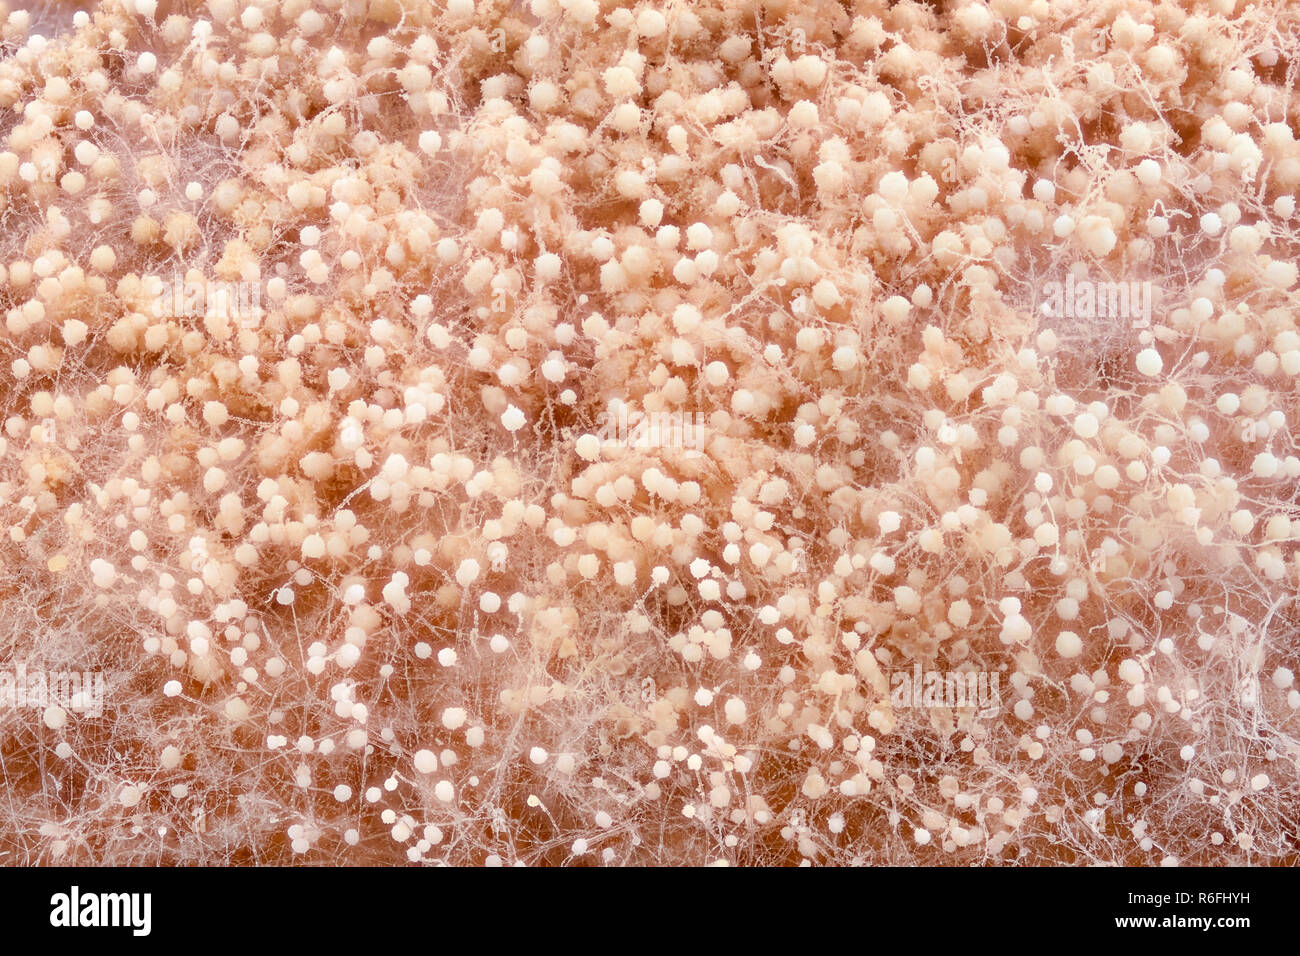 Extreme magnification - Mold matured on bread Stock Photo